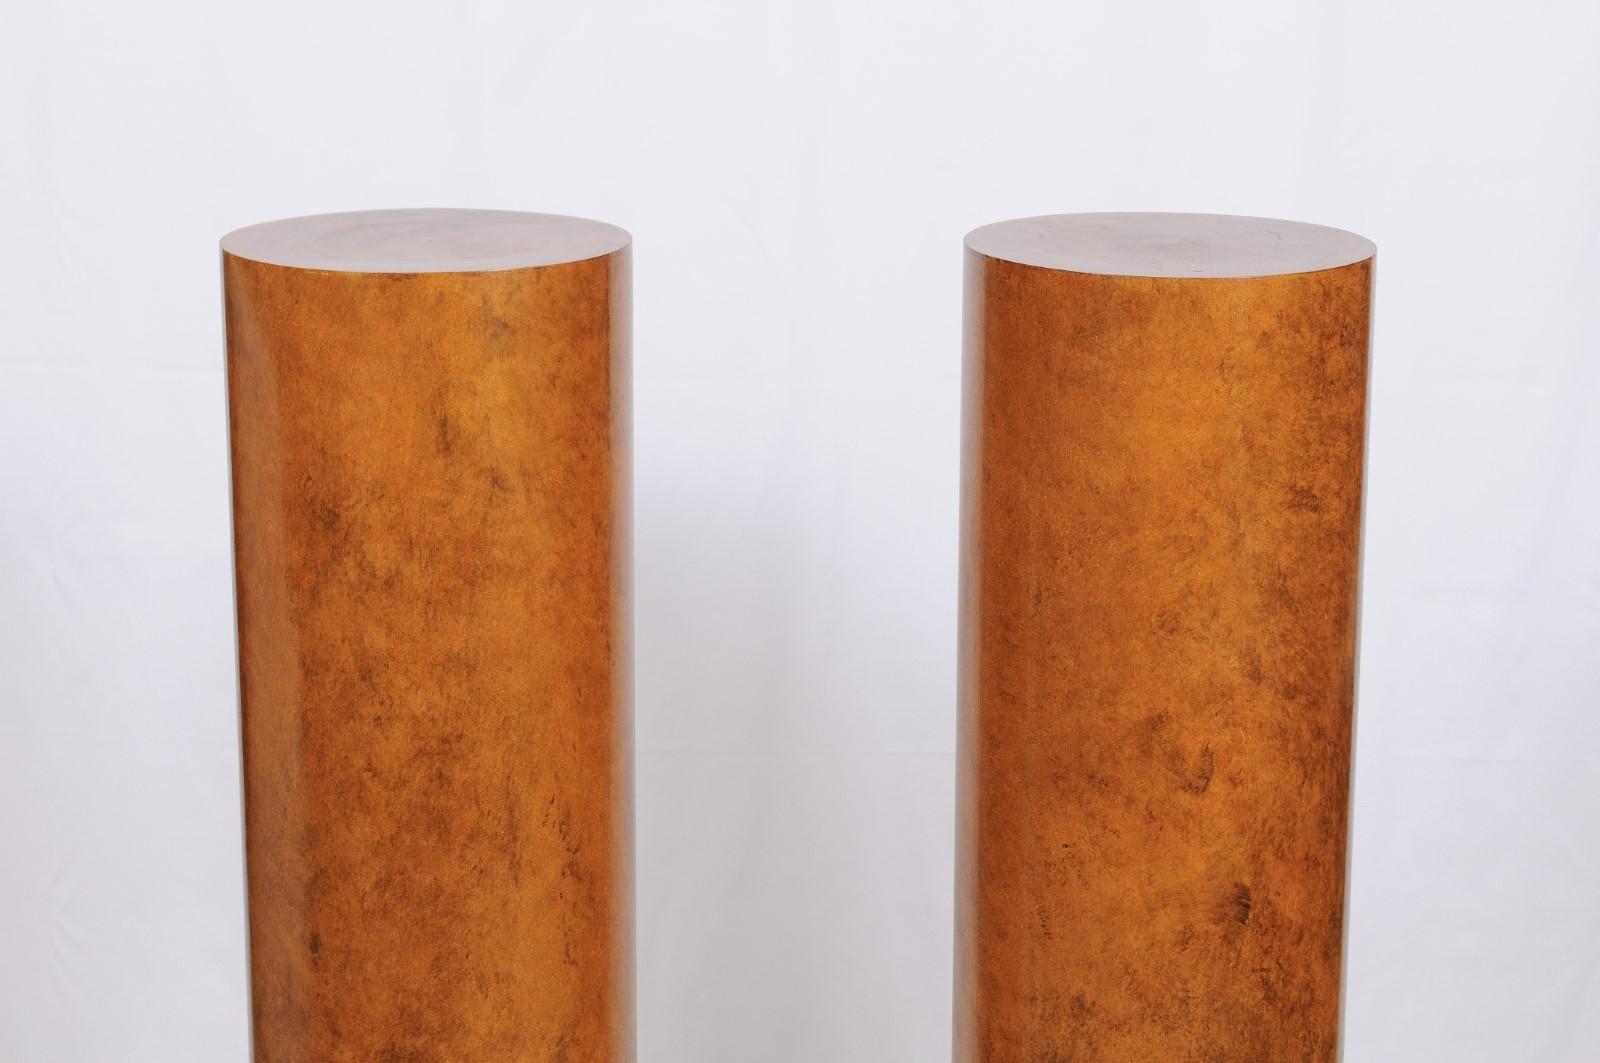 Pair of faux painted column pedestals from the collection of Judith & Gerson Leiber. The finish is painted in a faux bois style to replicate bird's-eye maple with Classic black bases, and all set within a clean Art Deco style.